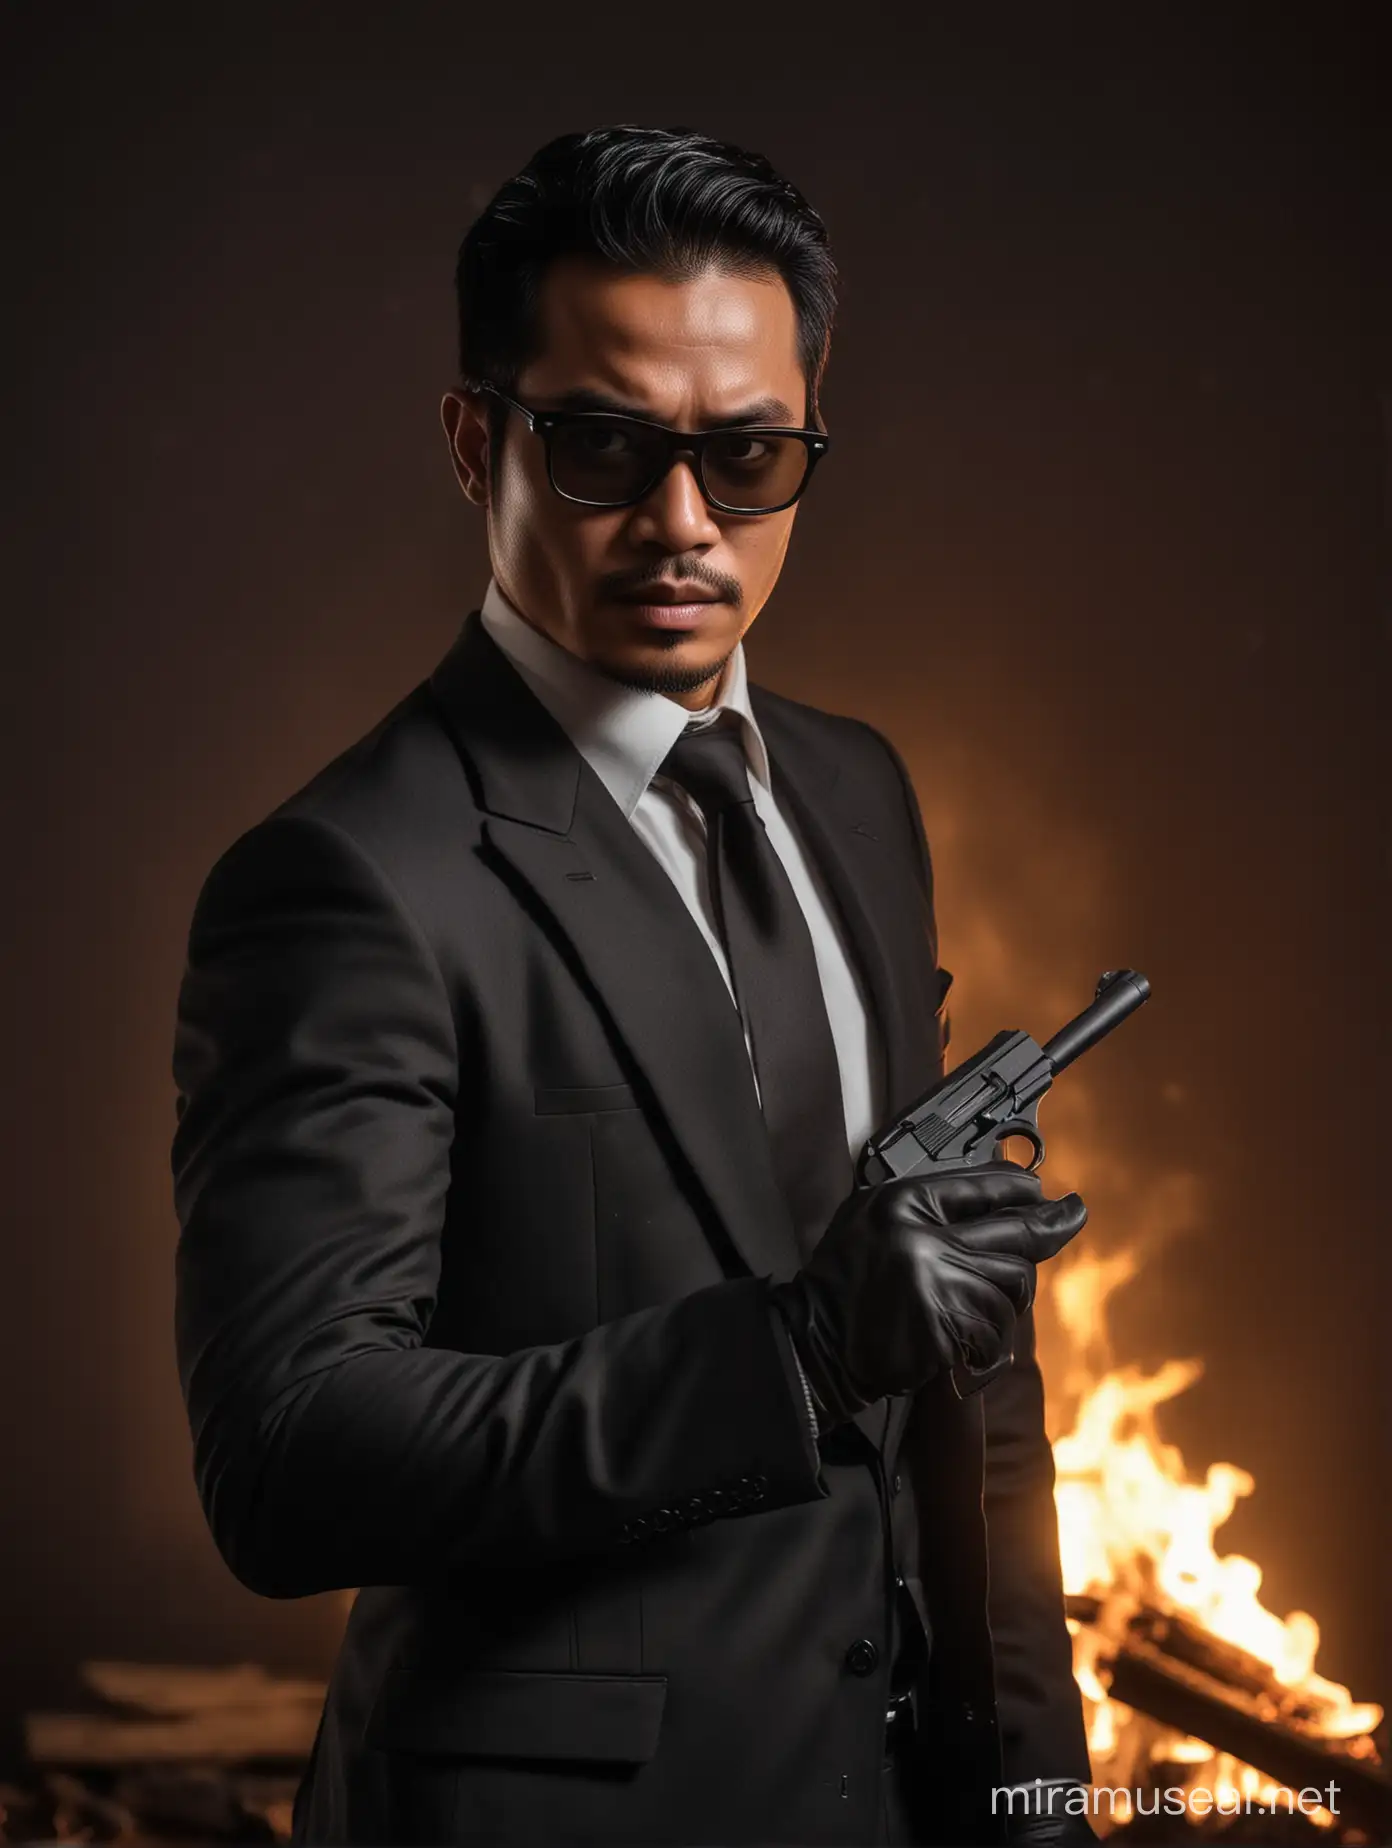 Indonesian man, 36 year old, wearing black suit as a secret agent, black glasses, black gloves, hold the gun, stand in front of fire, at midnight